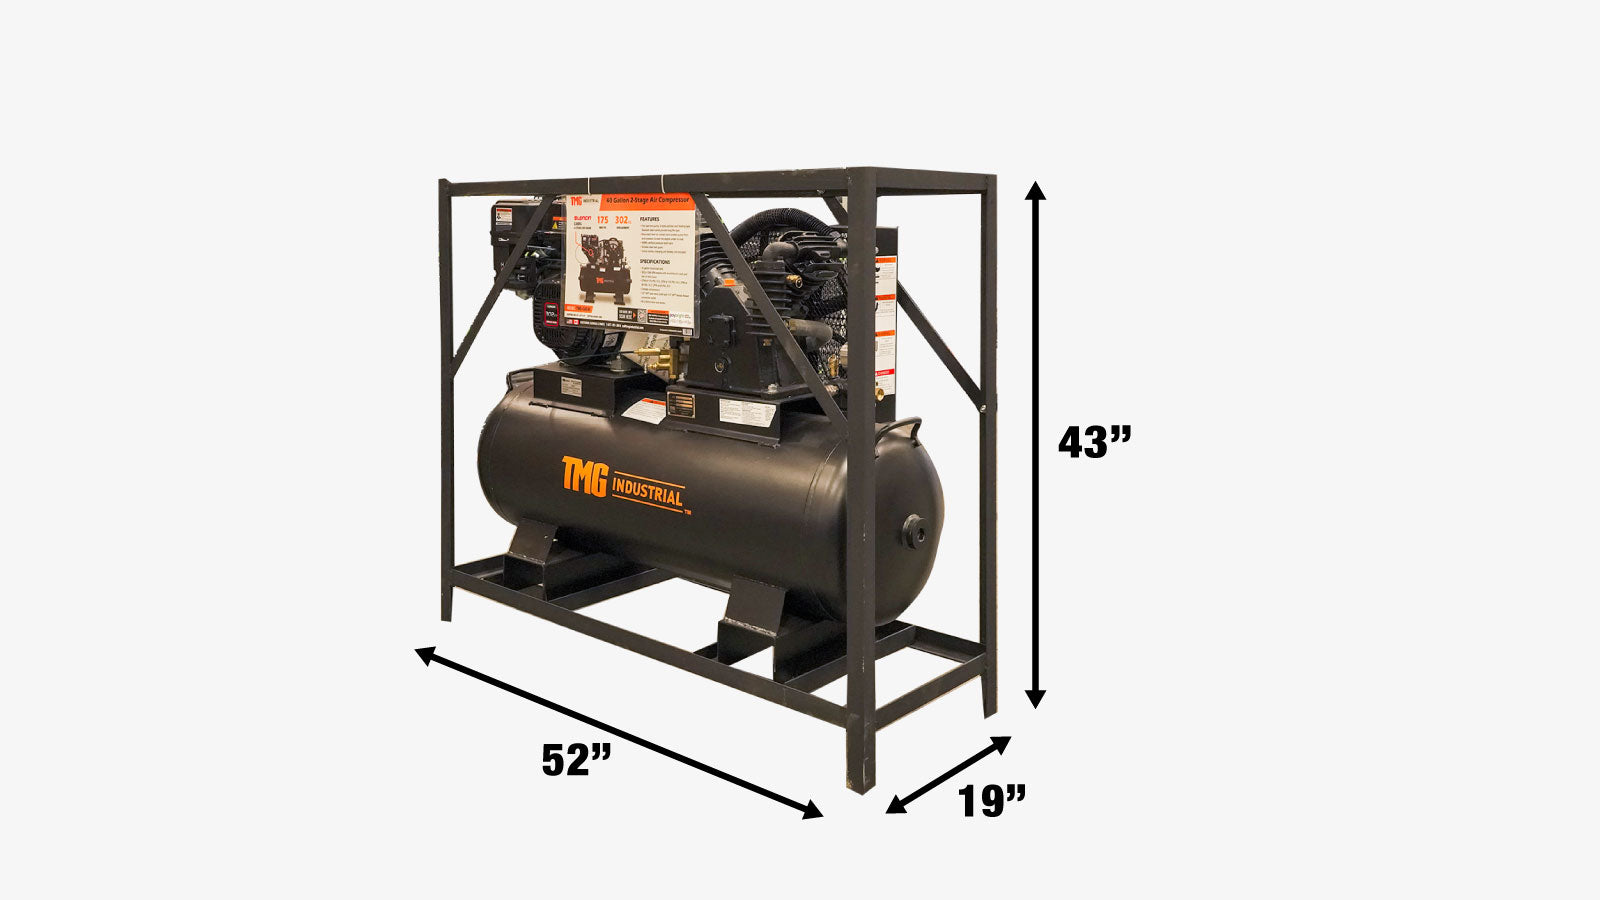 TMG Industrial 40 Gallon 2-Stage Truck Mounted Air Compressor, 9 HP OHV Loncin Engine, Horizontal Tank, 18.7 CFM @ 90 PSI, TMG-GAC40-shipping-info-image